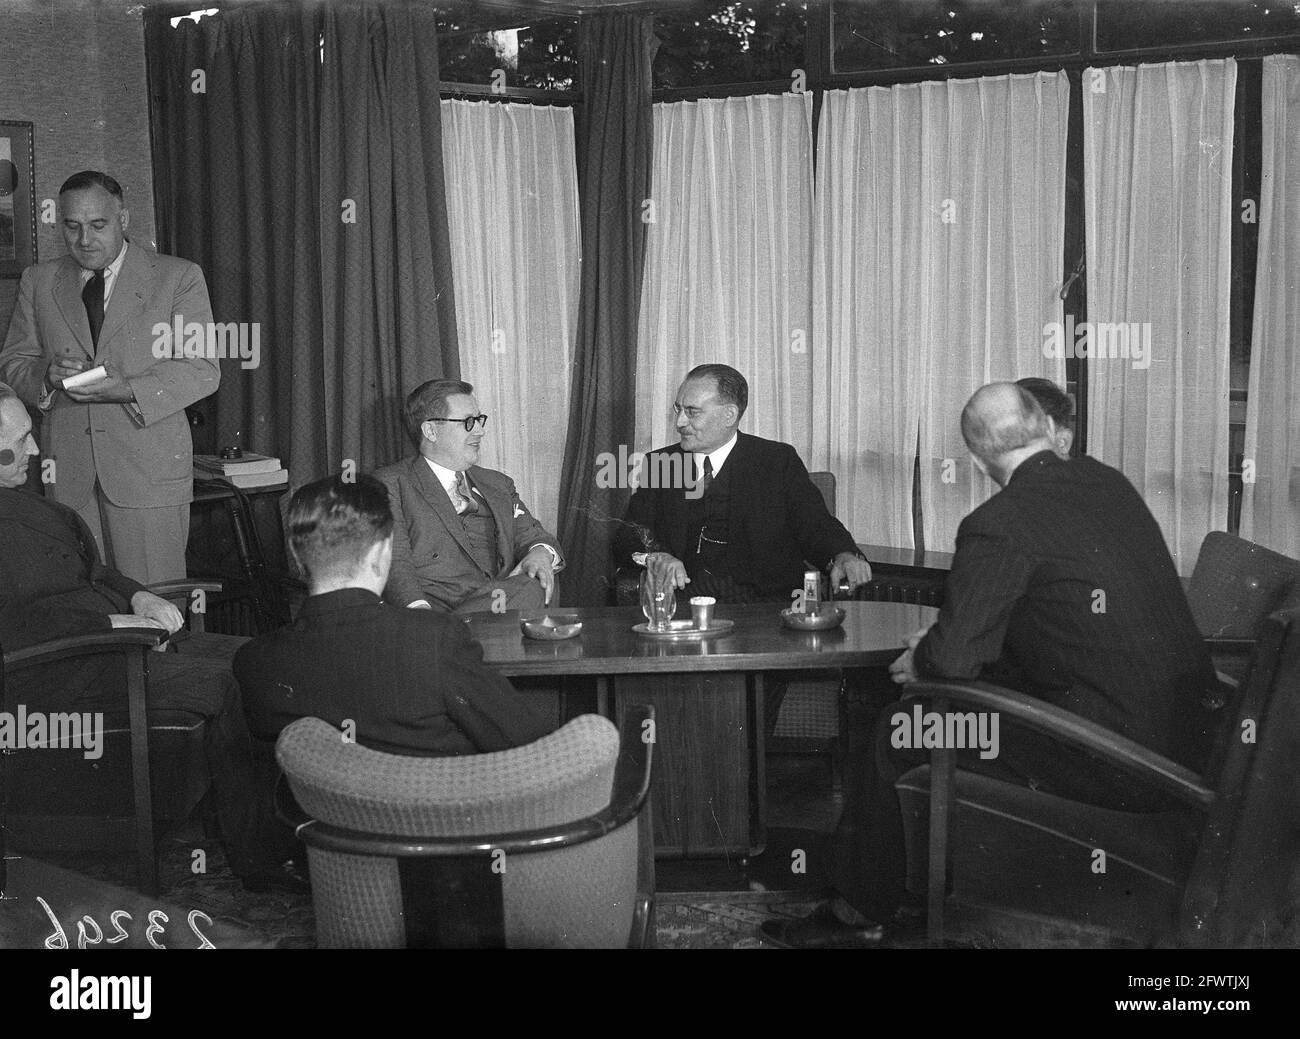 Signing of Belgian-Dutch treaty on social insurance mutuality. Minister Drees with Belgian Minister L.E. Troclet and officials for the signing, 29 August 1947, International agreements, Ministers, The Netherlands, 20th century press agency photo, news to remember, documentary, historic photography 1945-1990, visual stories, human history of the Twentieth Century, capturing moments in time Stock Photo